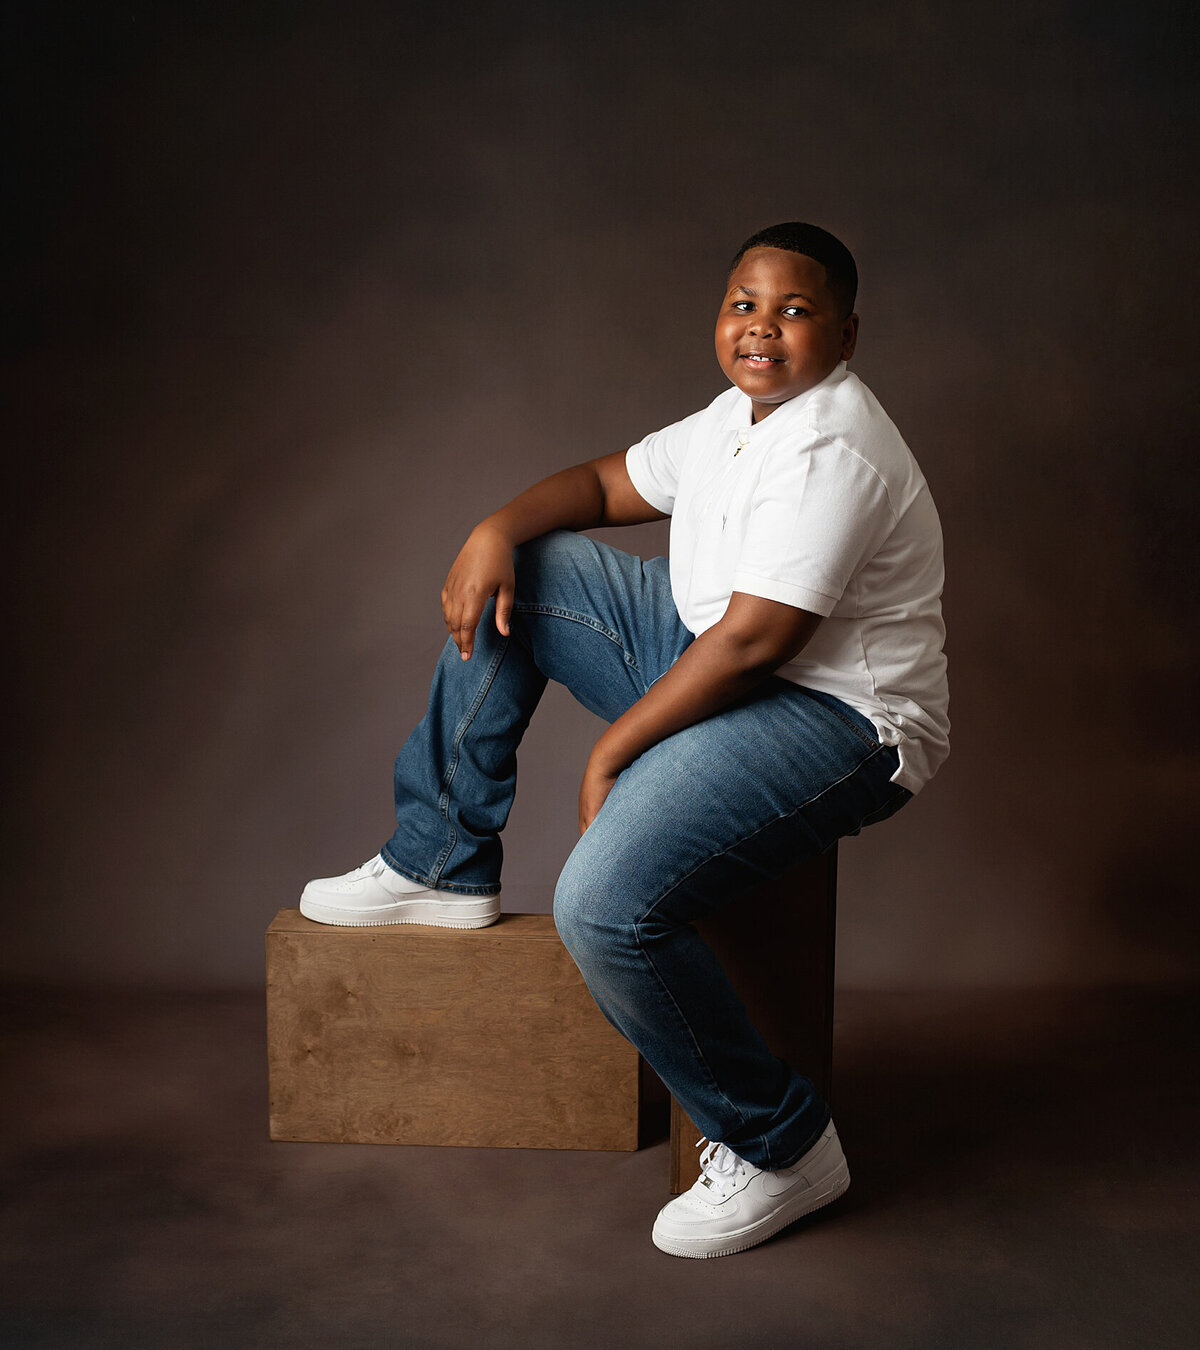 A captivating studio phot session featuring a boy, highlighting their unique personality and features.